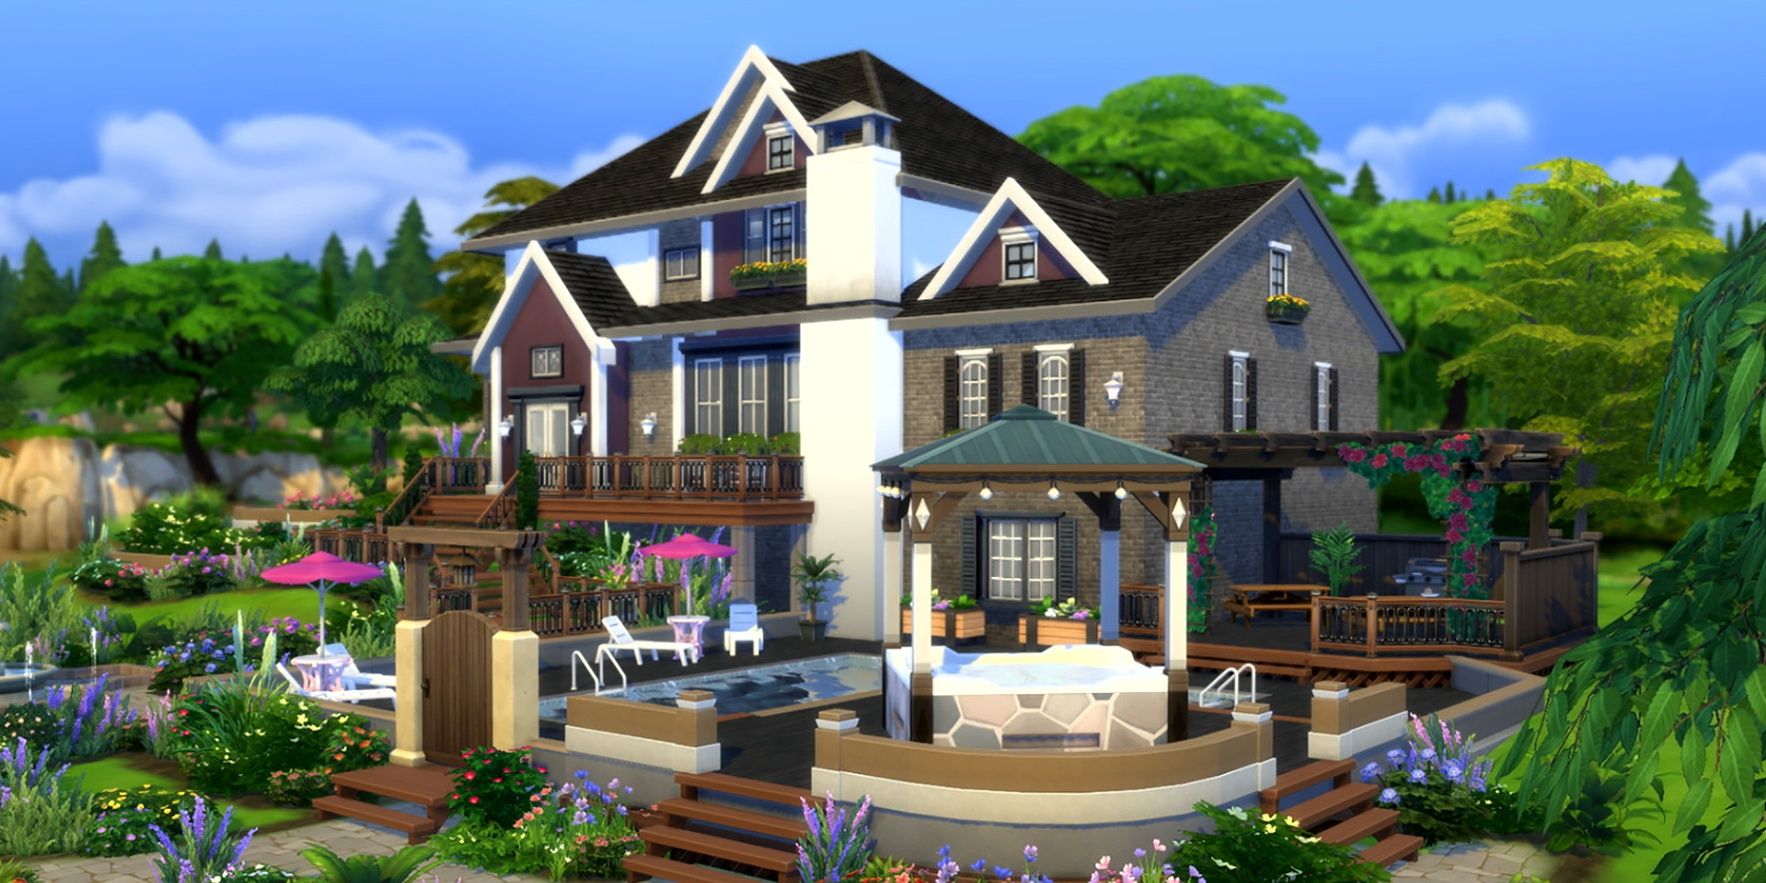 A vintage house in The Sims 4